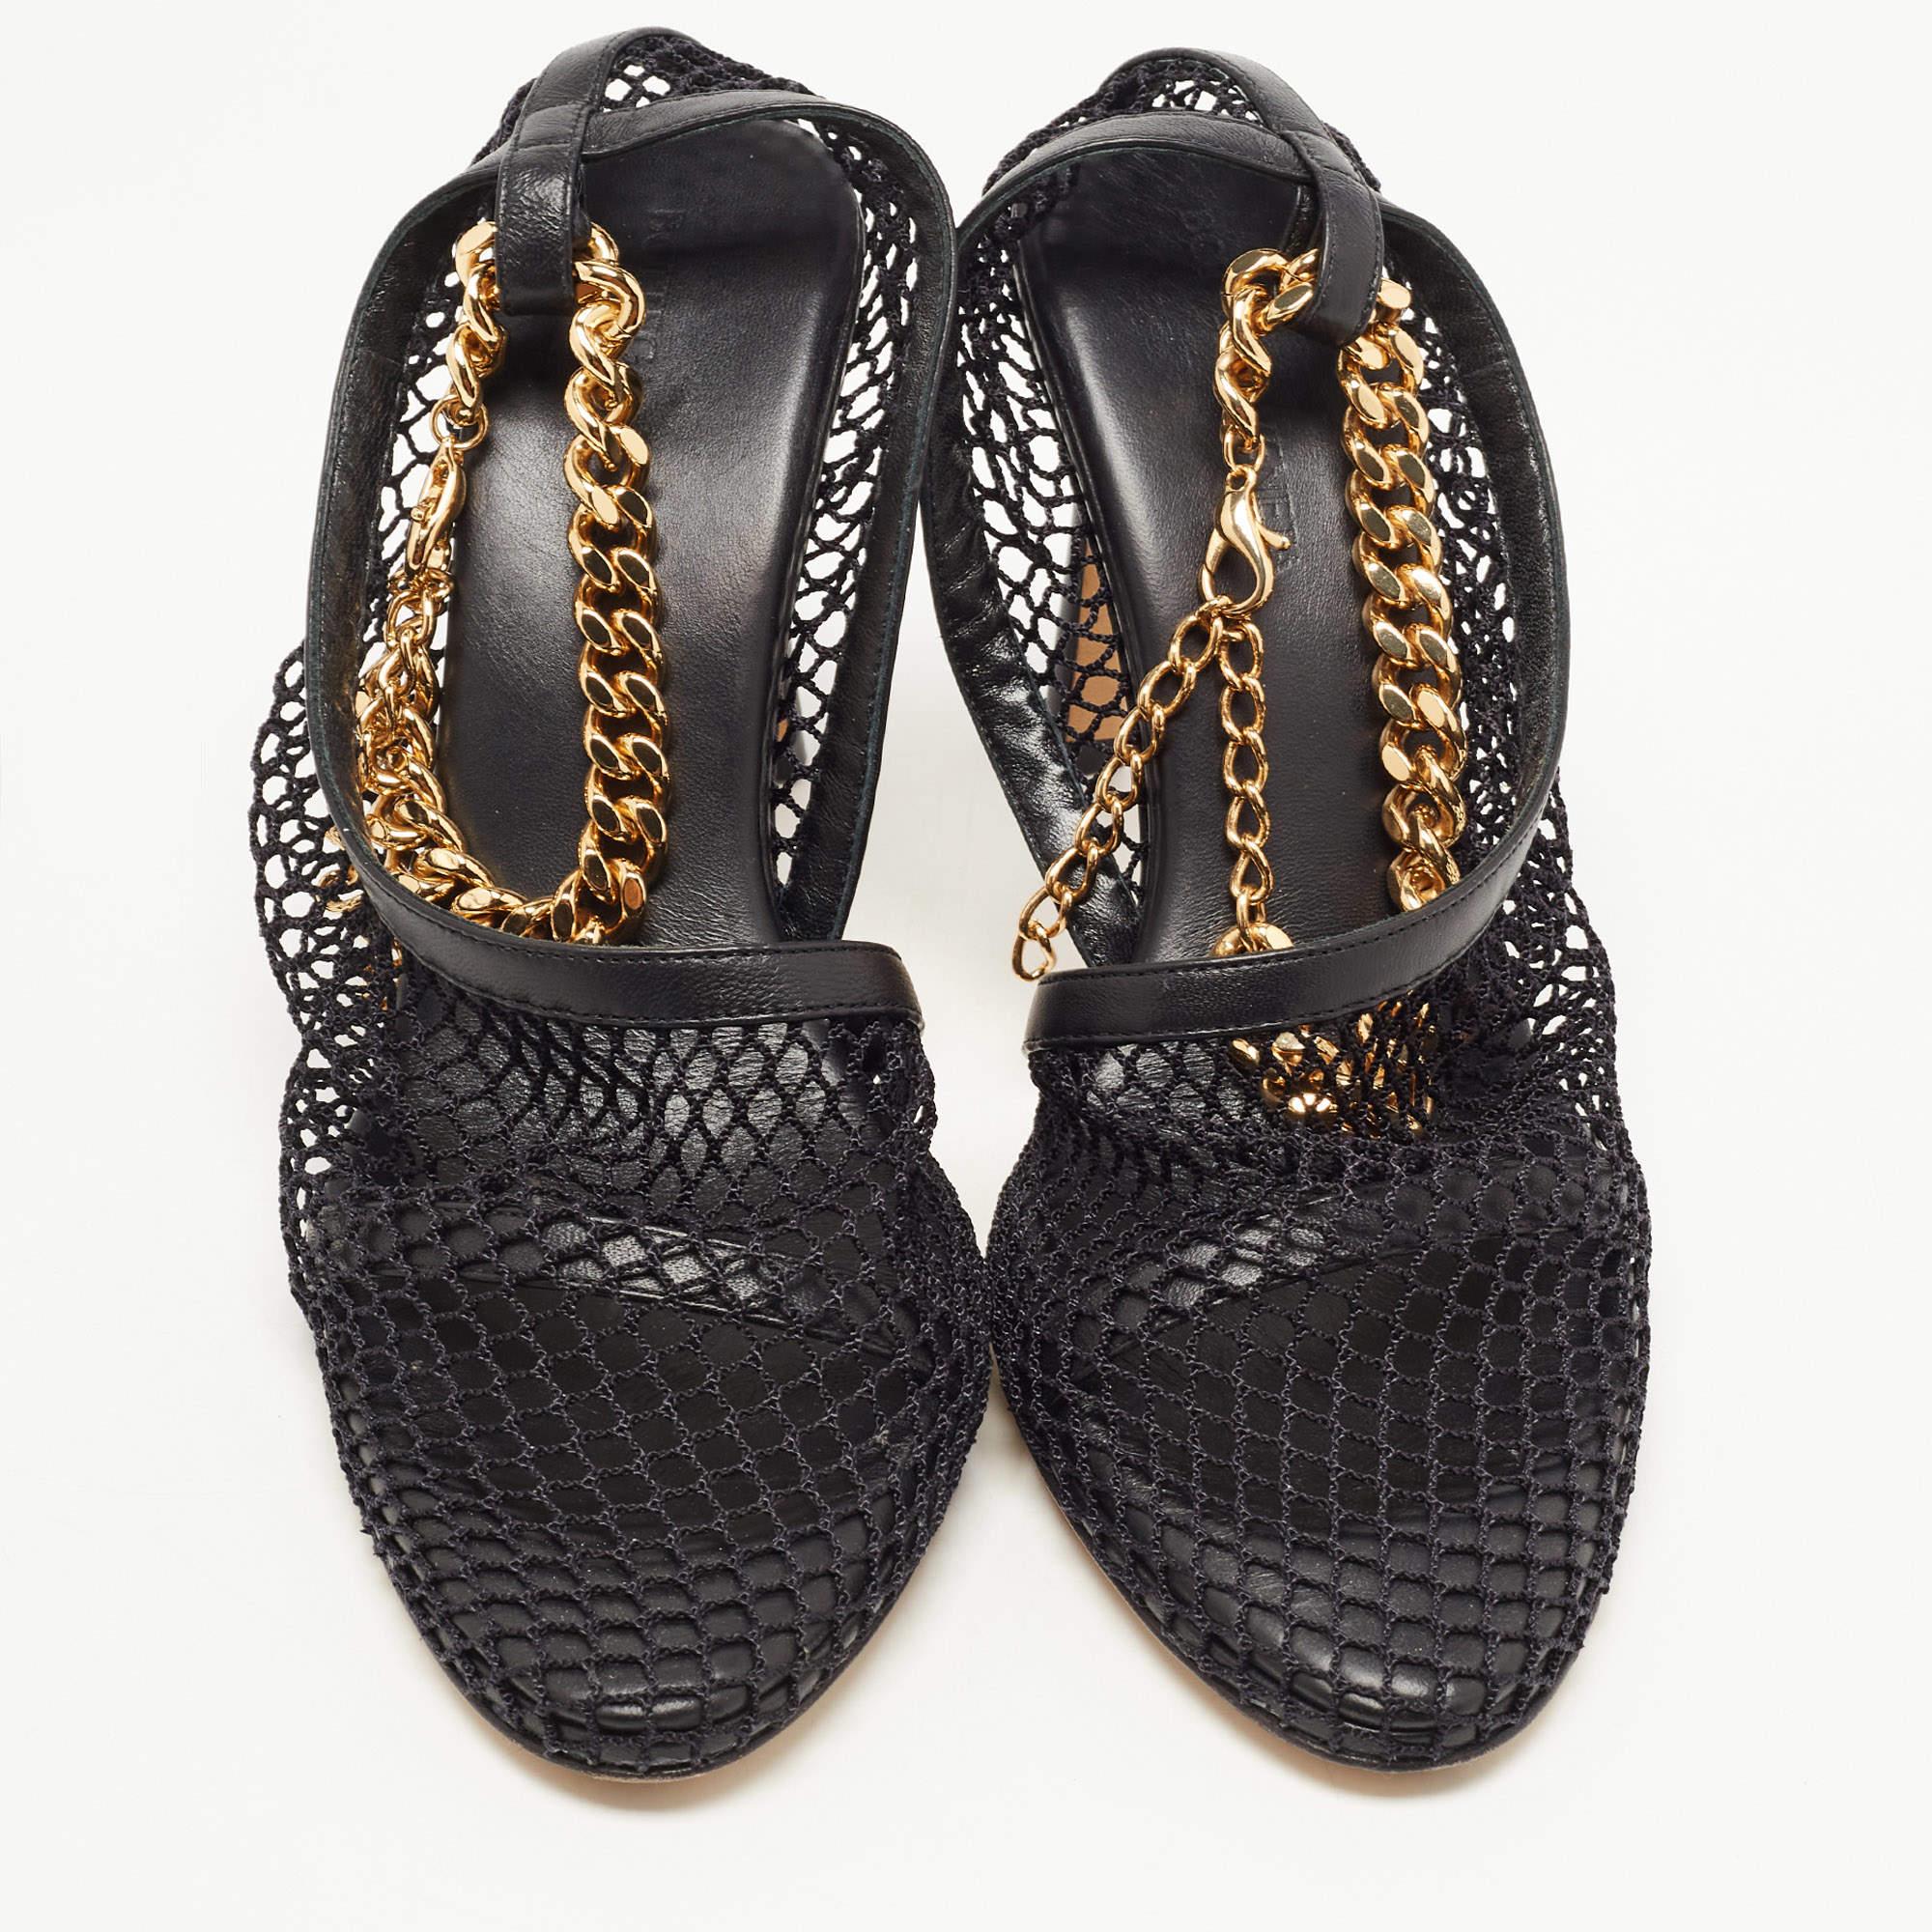 The BV sandals are a stylish and edgy footwear choice. These avant-garde sandals feature a combination of black mesh and leather materials, with chunky chain detail on the ankle strap, adding a touch of sophistication. They offer both comfort and a